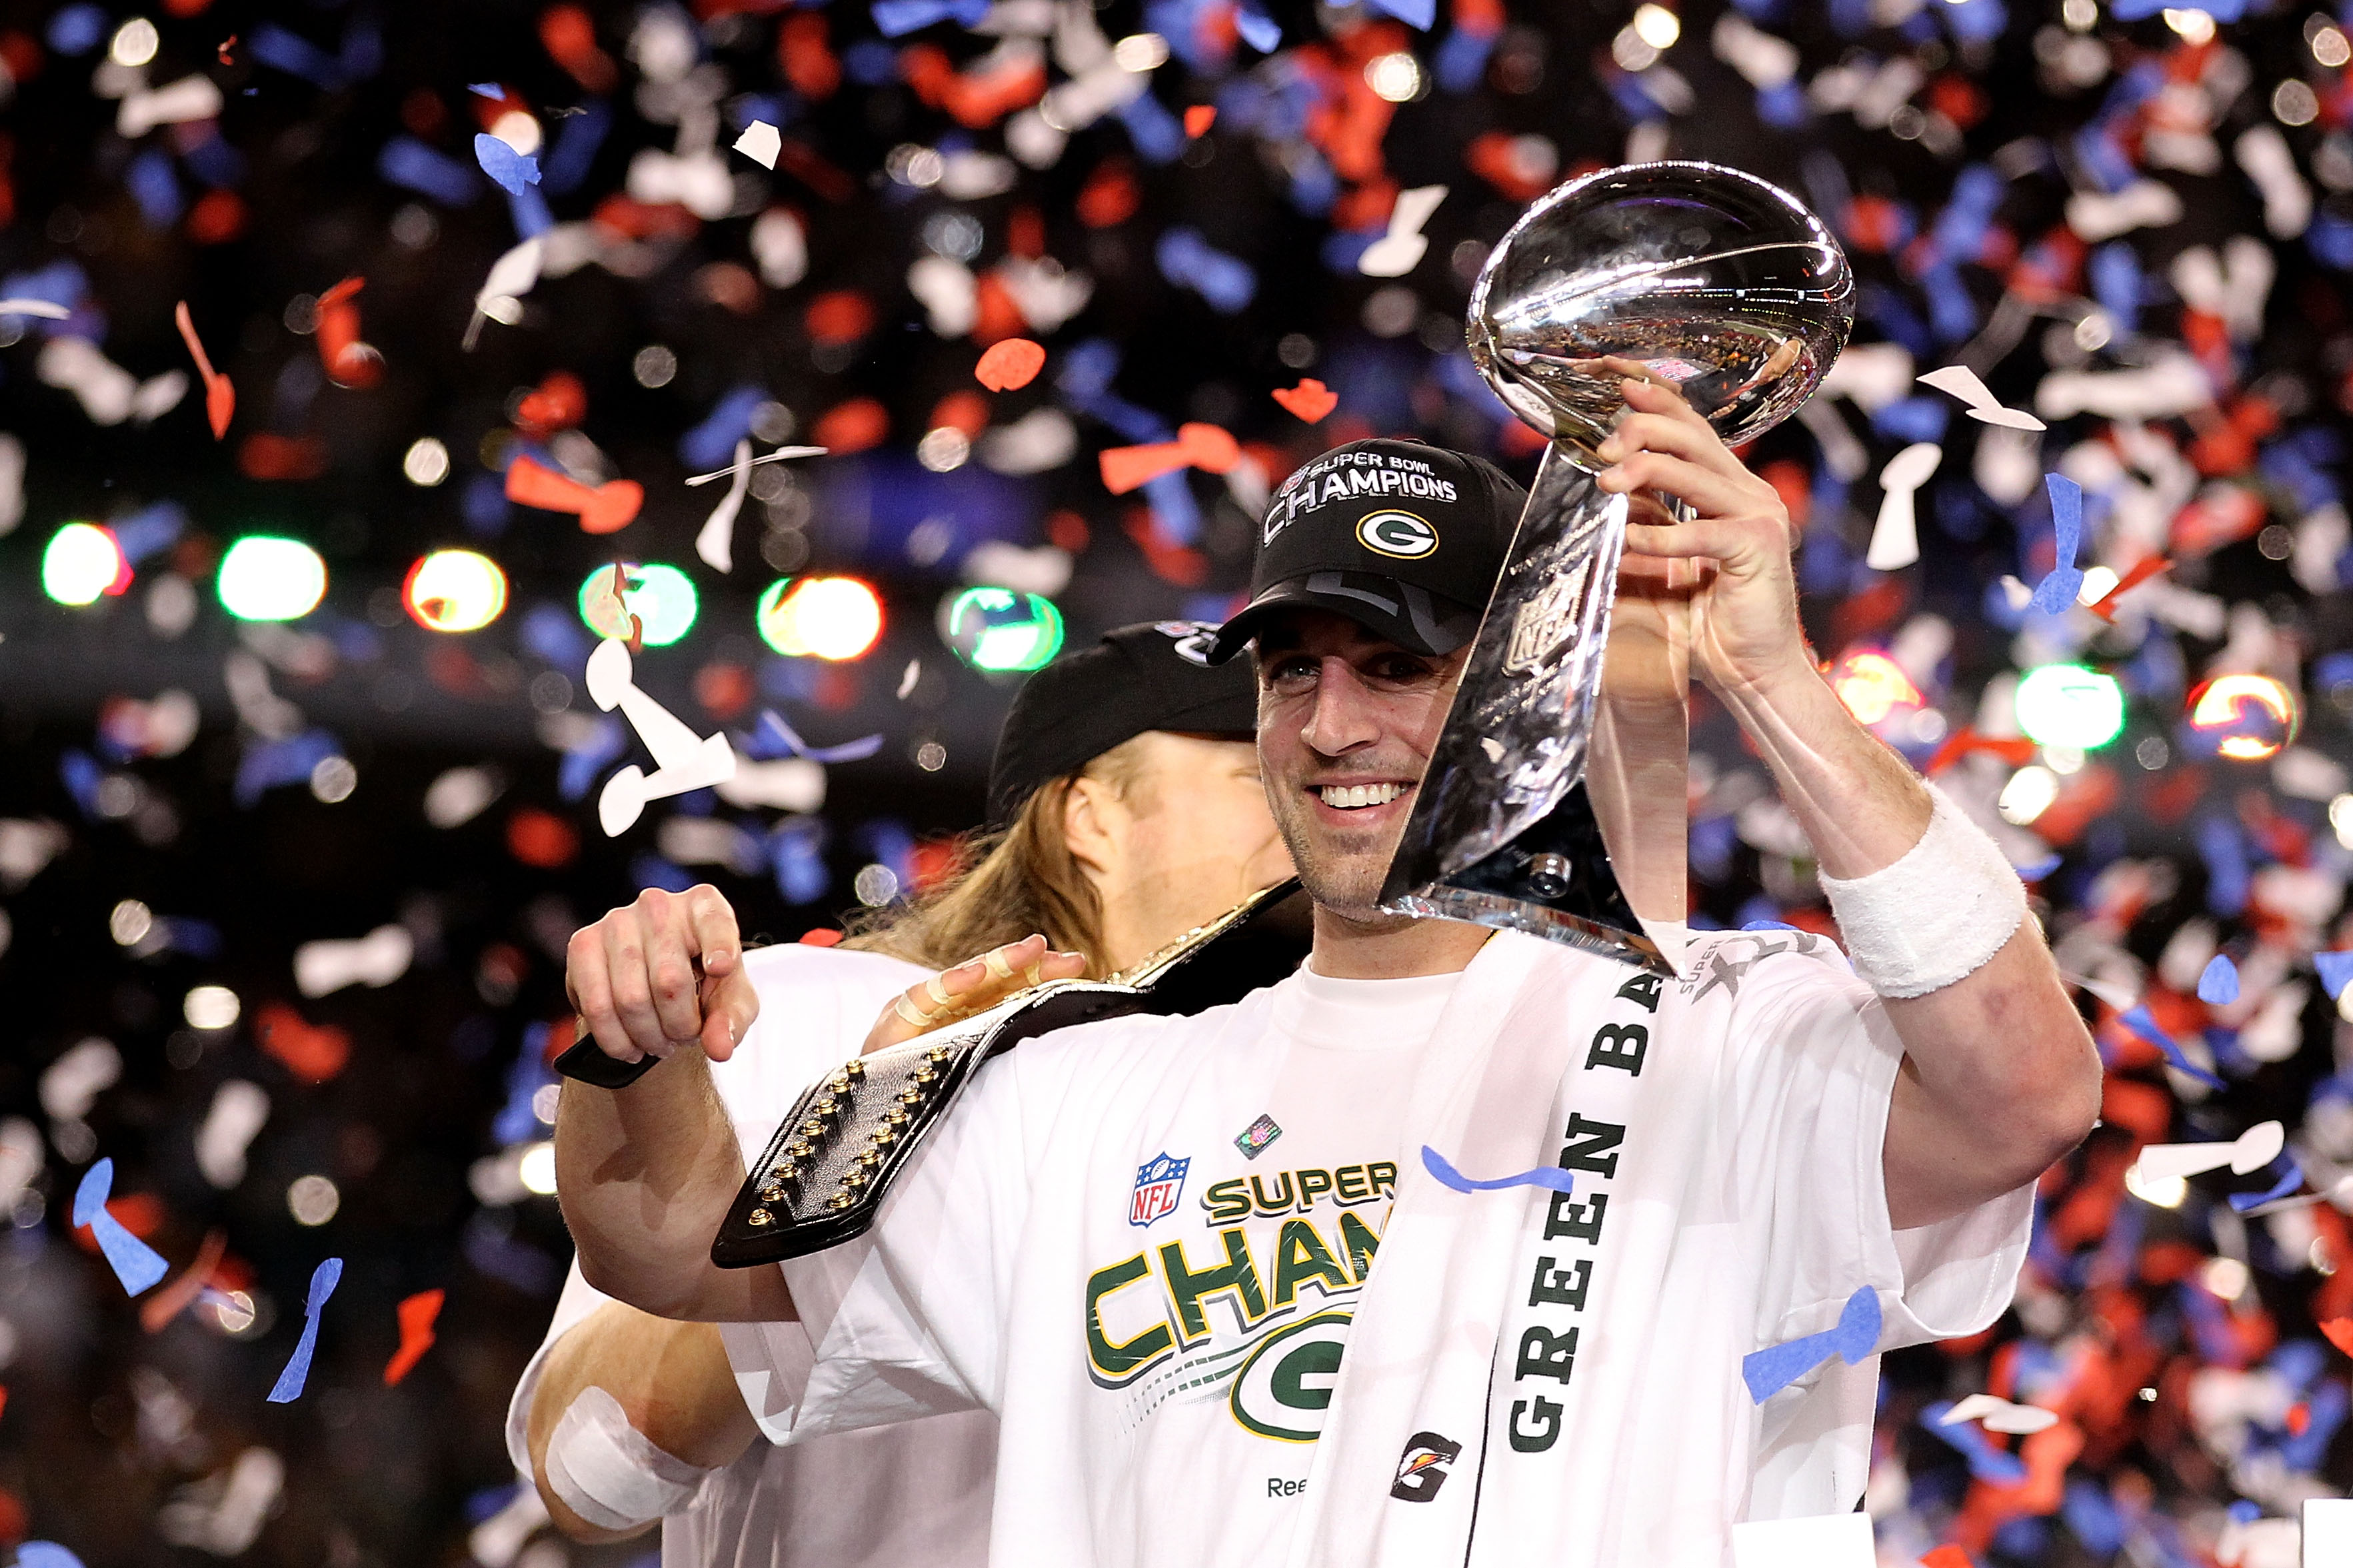 Super Bowl Xlv And The 15 Best Super Bowls Of The Last 25 Years